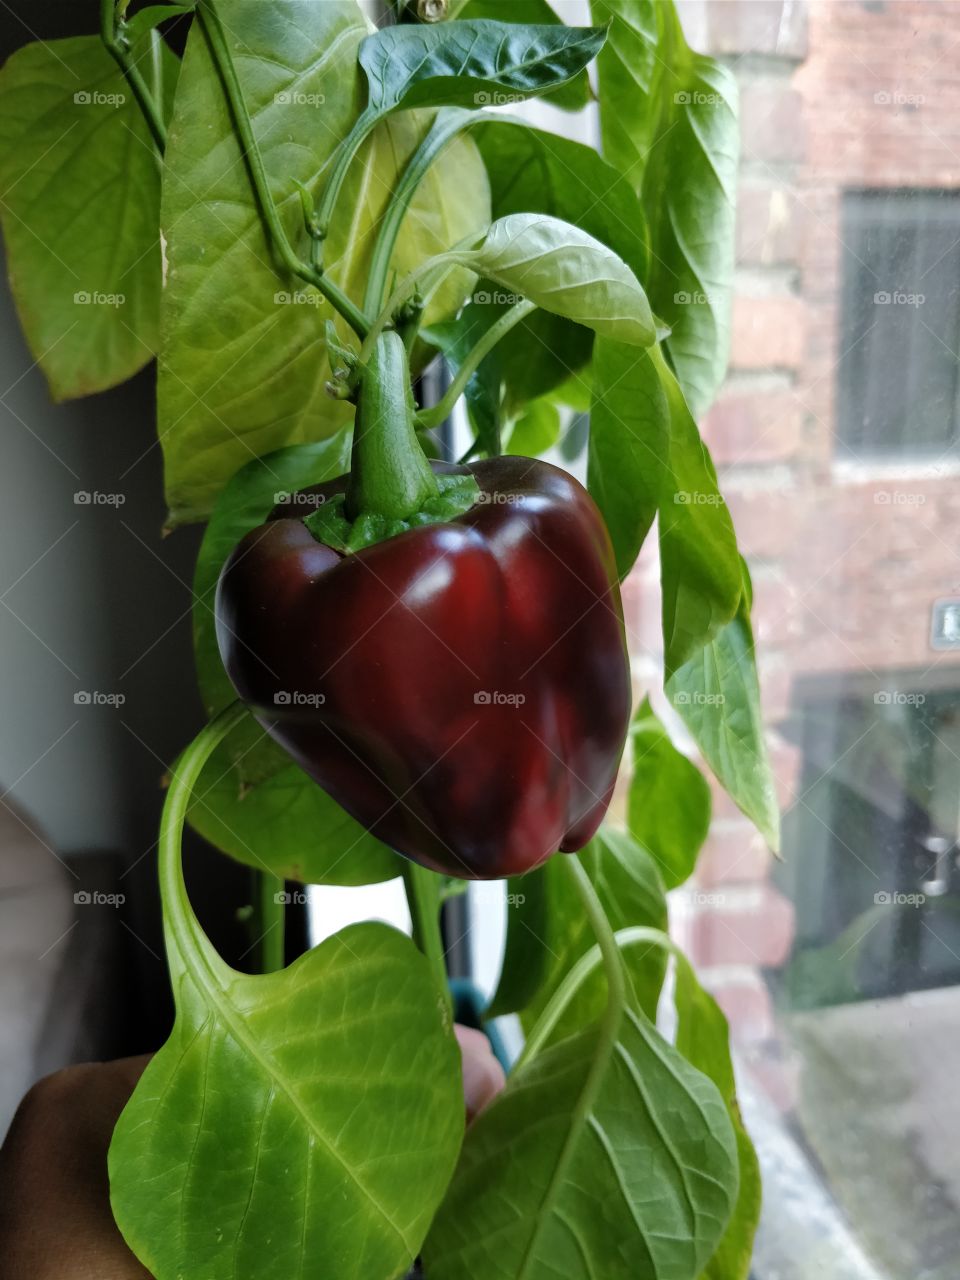 Everything grows with love. Bell pepper is the answer...